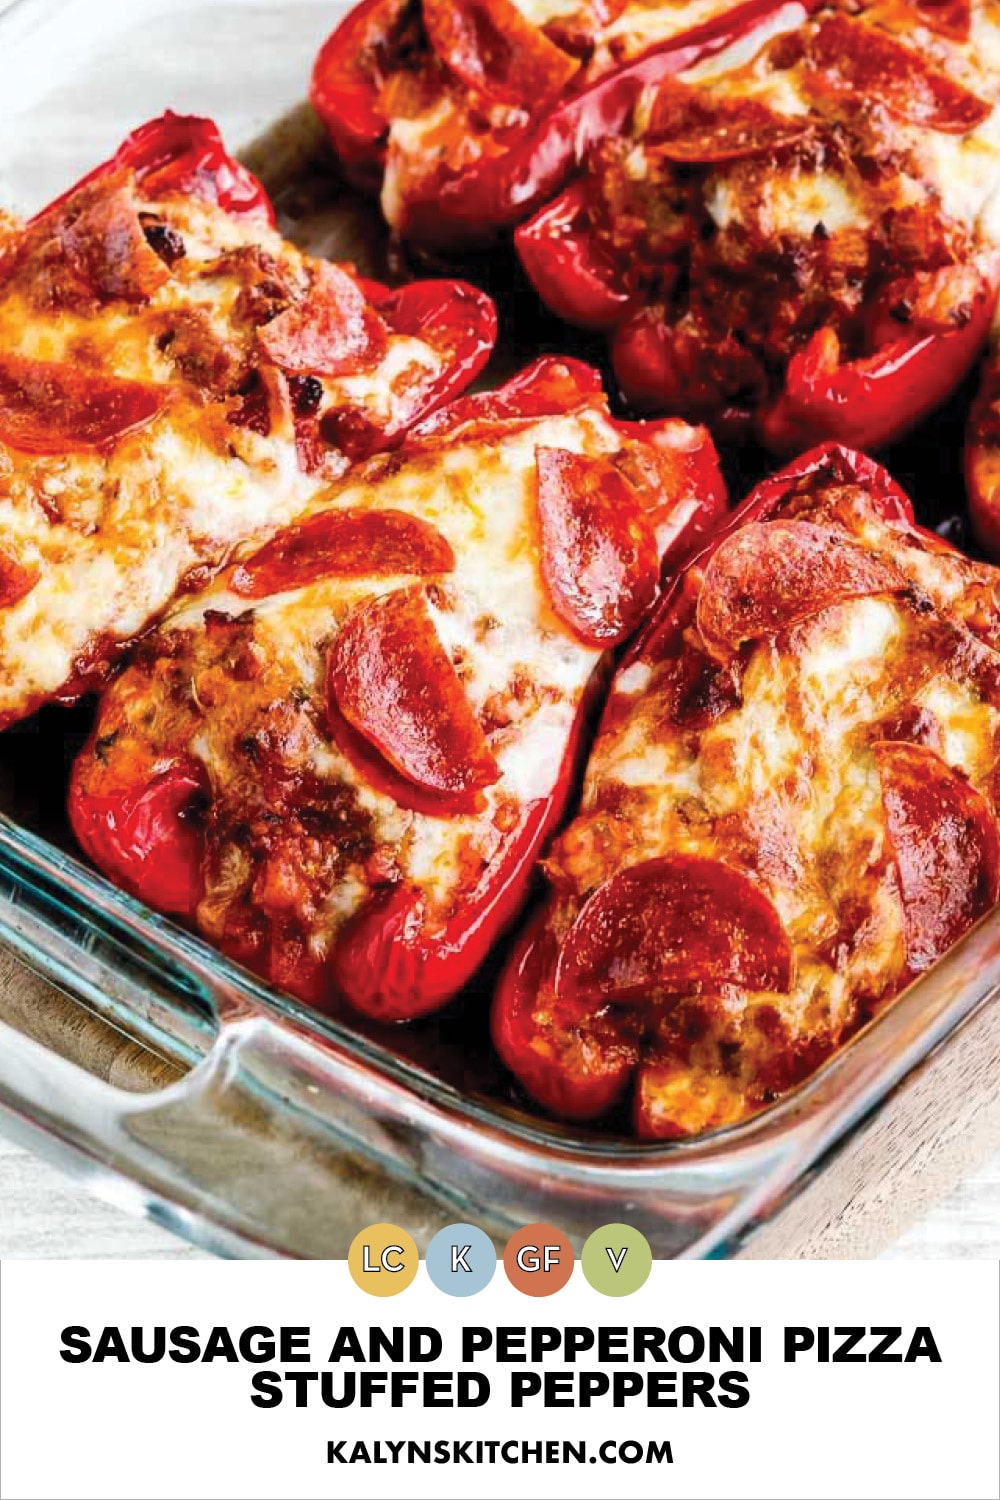 Pinterest image of Sausage and Pepperoni Pizza Stuffed Peppers